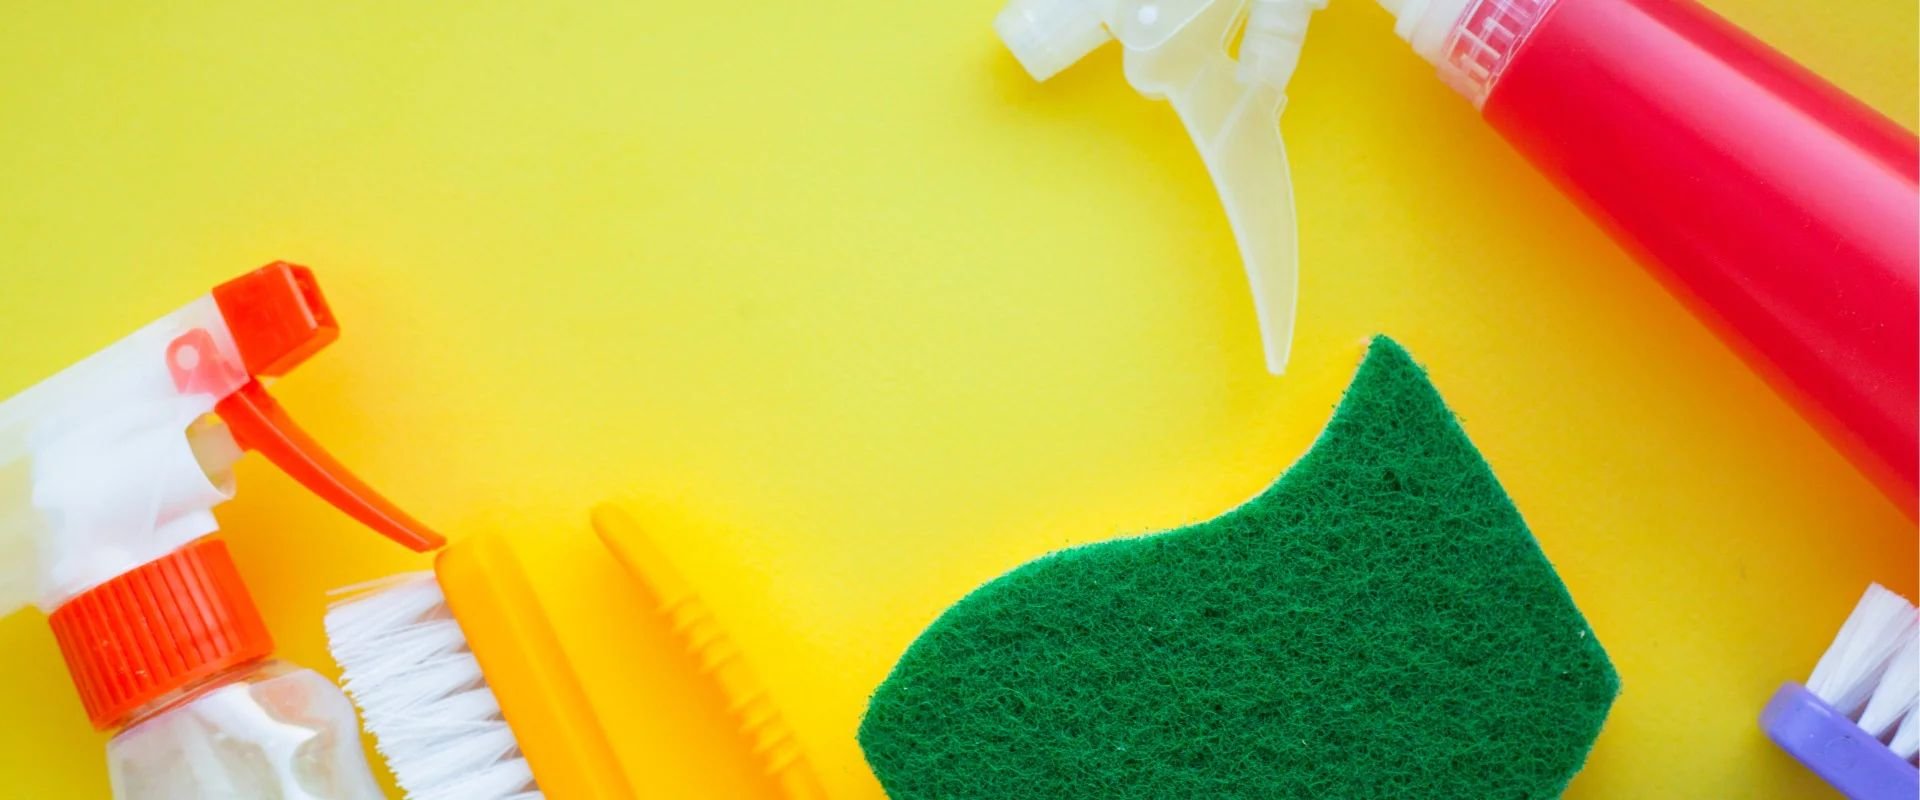 Sponge, brush, spray bottle, and other cleaning supplies